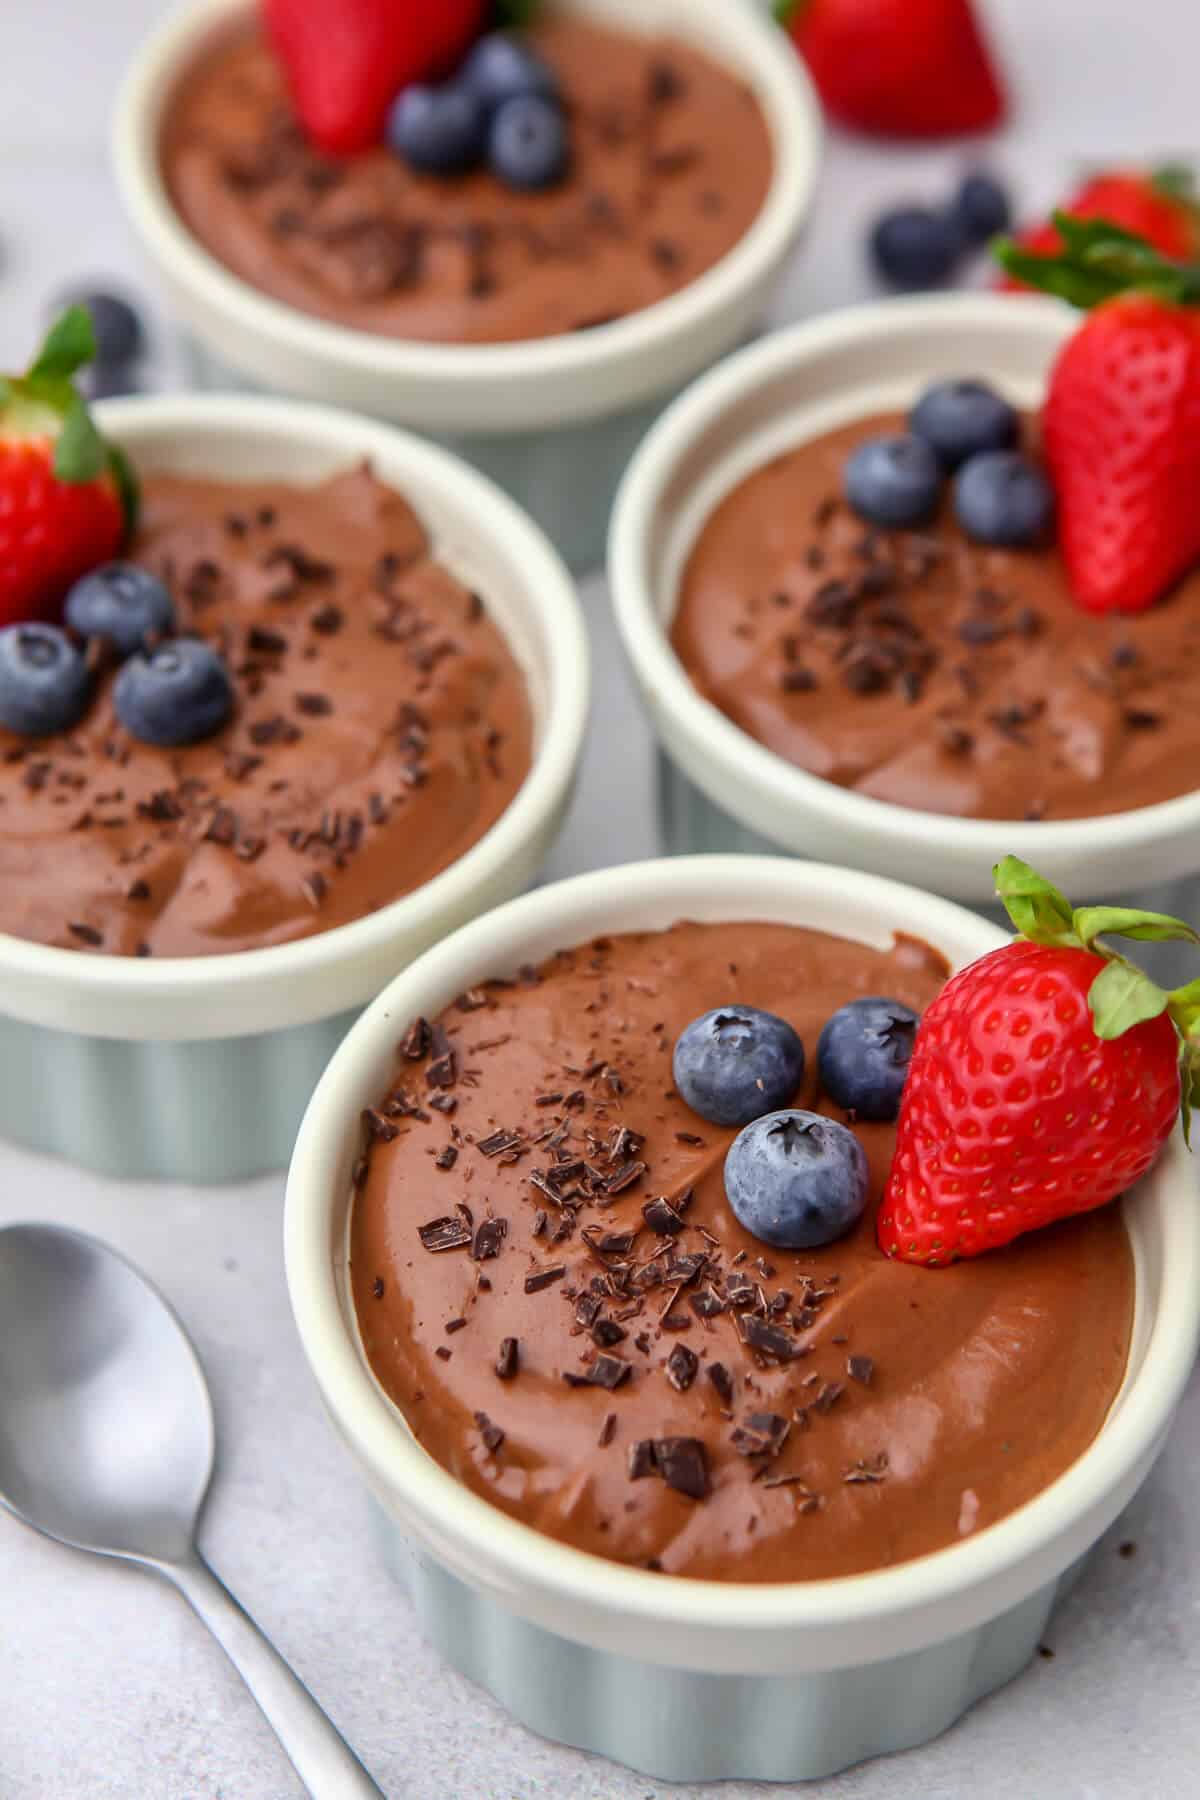 Four cups of vegan chocolate mousse with berries and chocolate shavings on top.